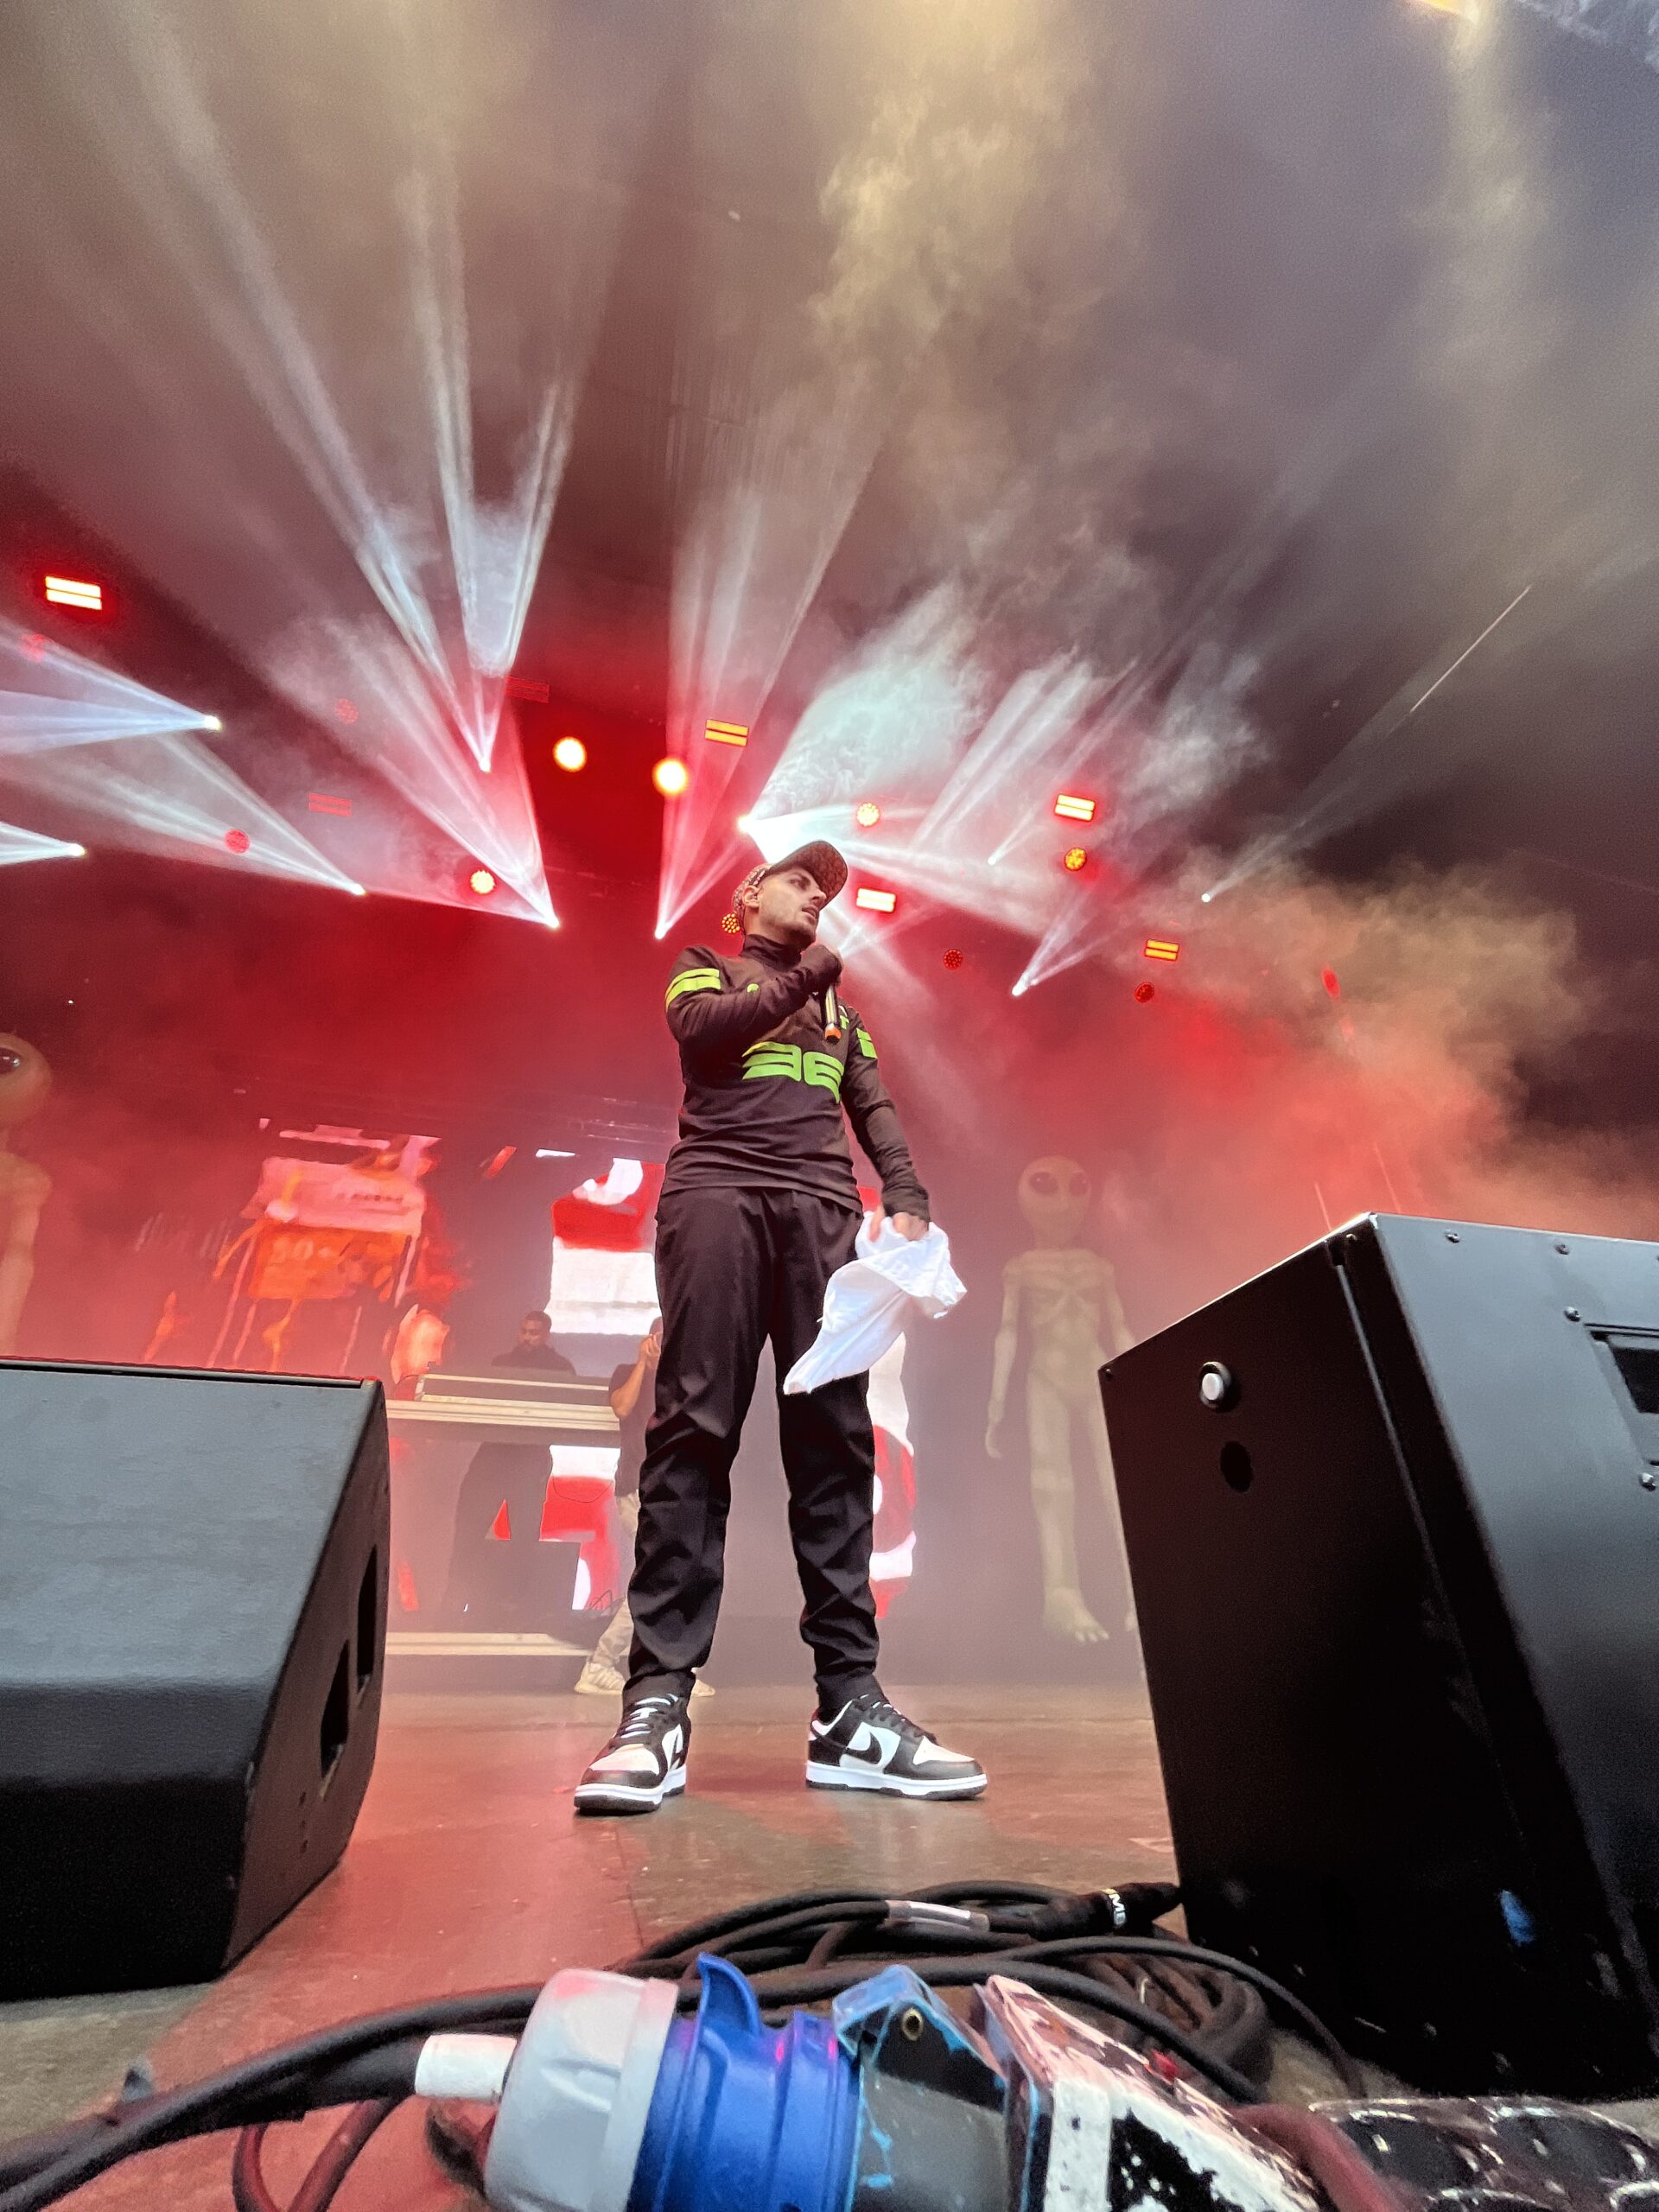 A36 performs on stage wearing tracksuit, Nike shoes and a cap. He holds a white towel in one hand and a microphone in the other. Red and white lights shine in the background.